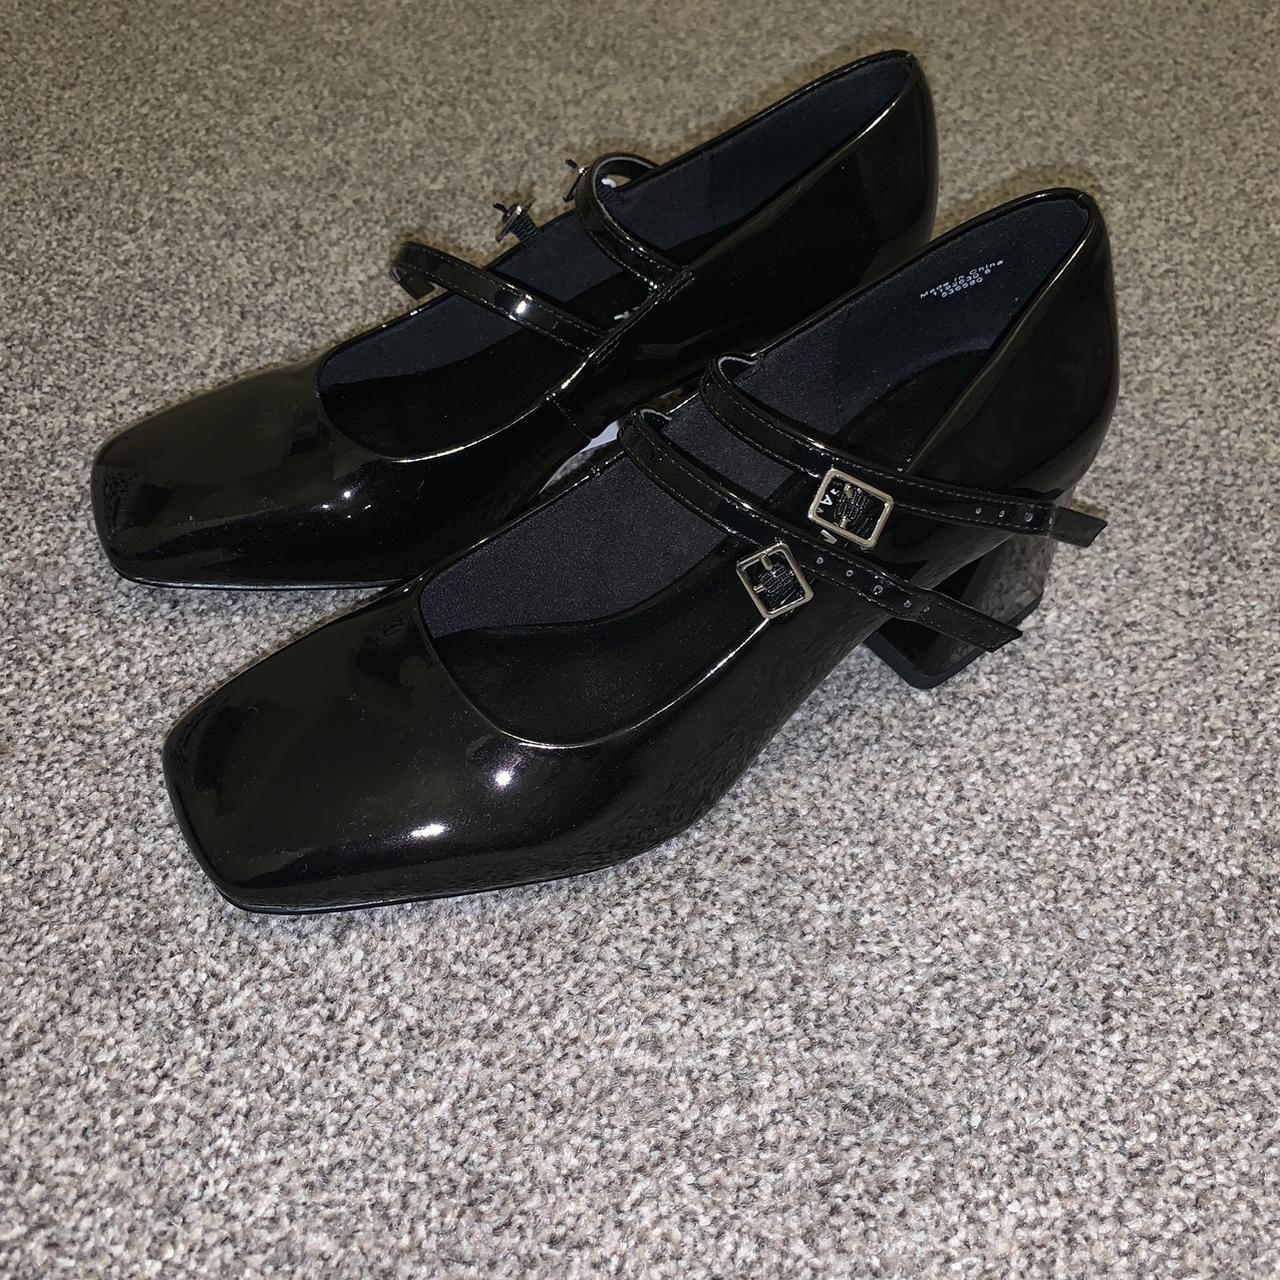 Black Mary Janes Two straps - Depop